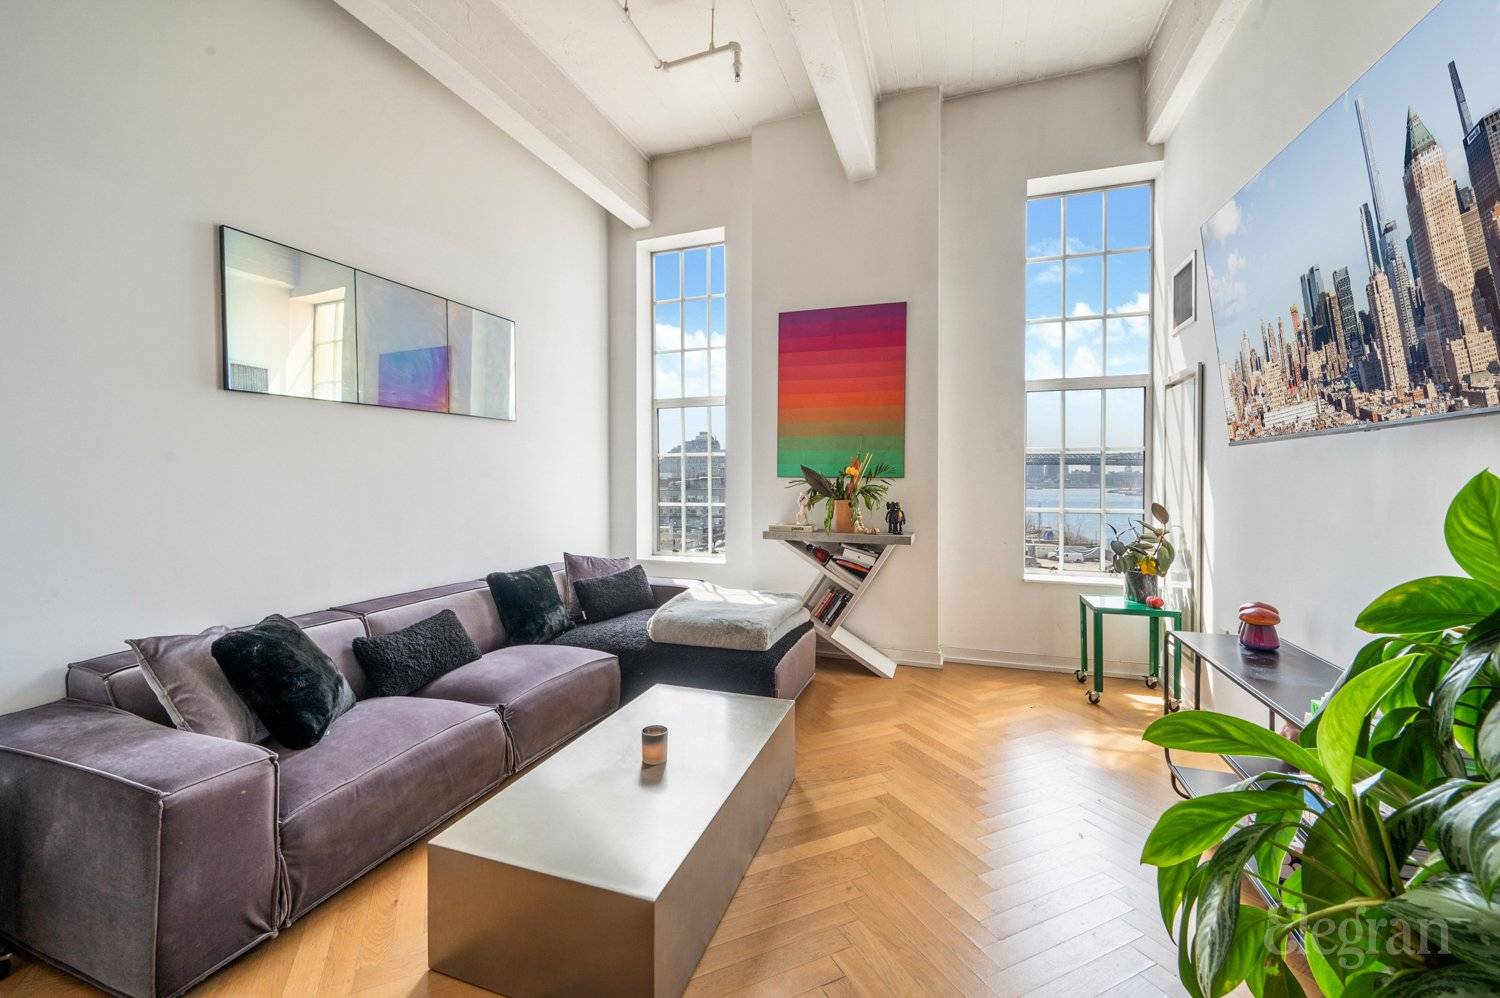 Welcome to this modern, sunny home on the North Williamsburg waterfront !